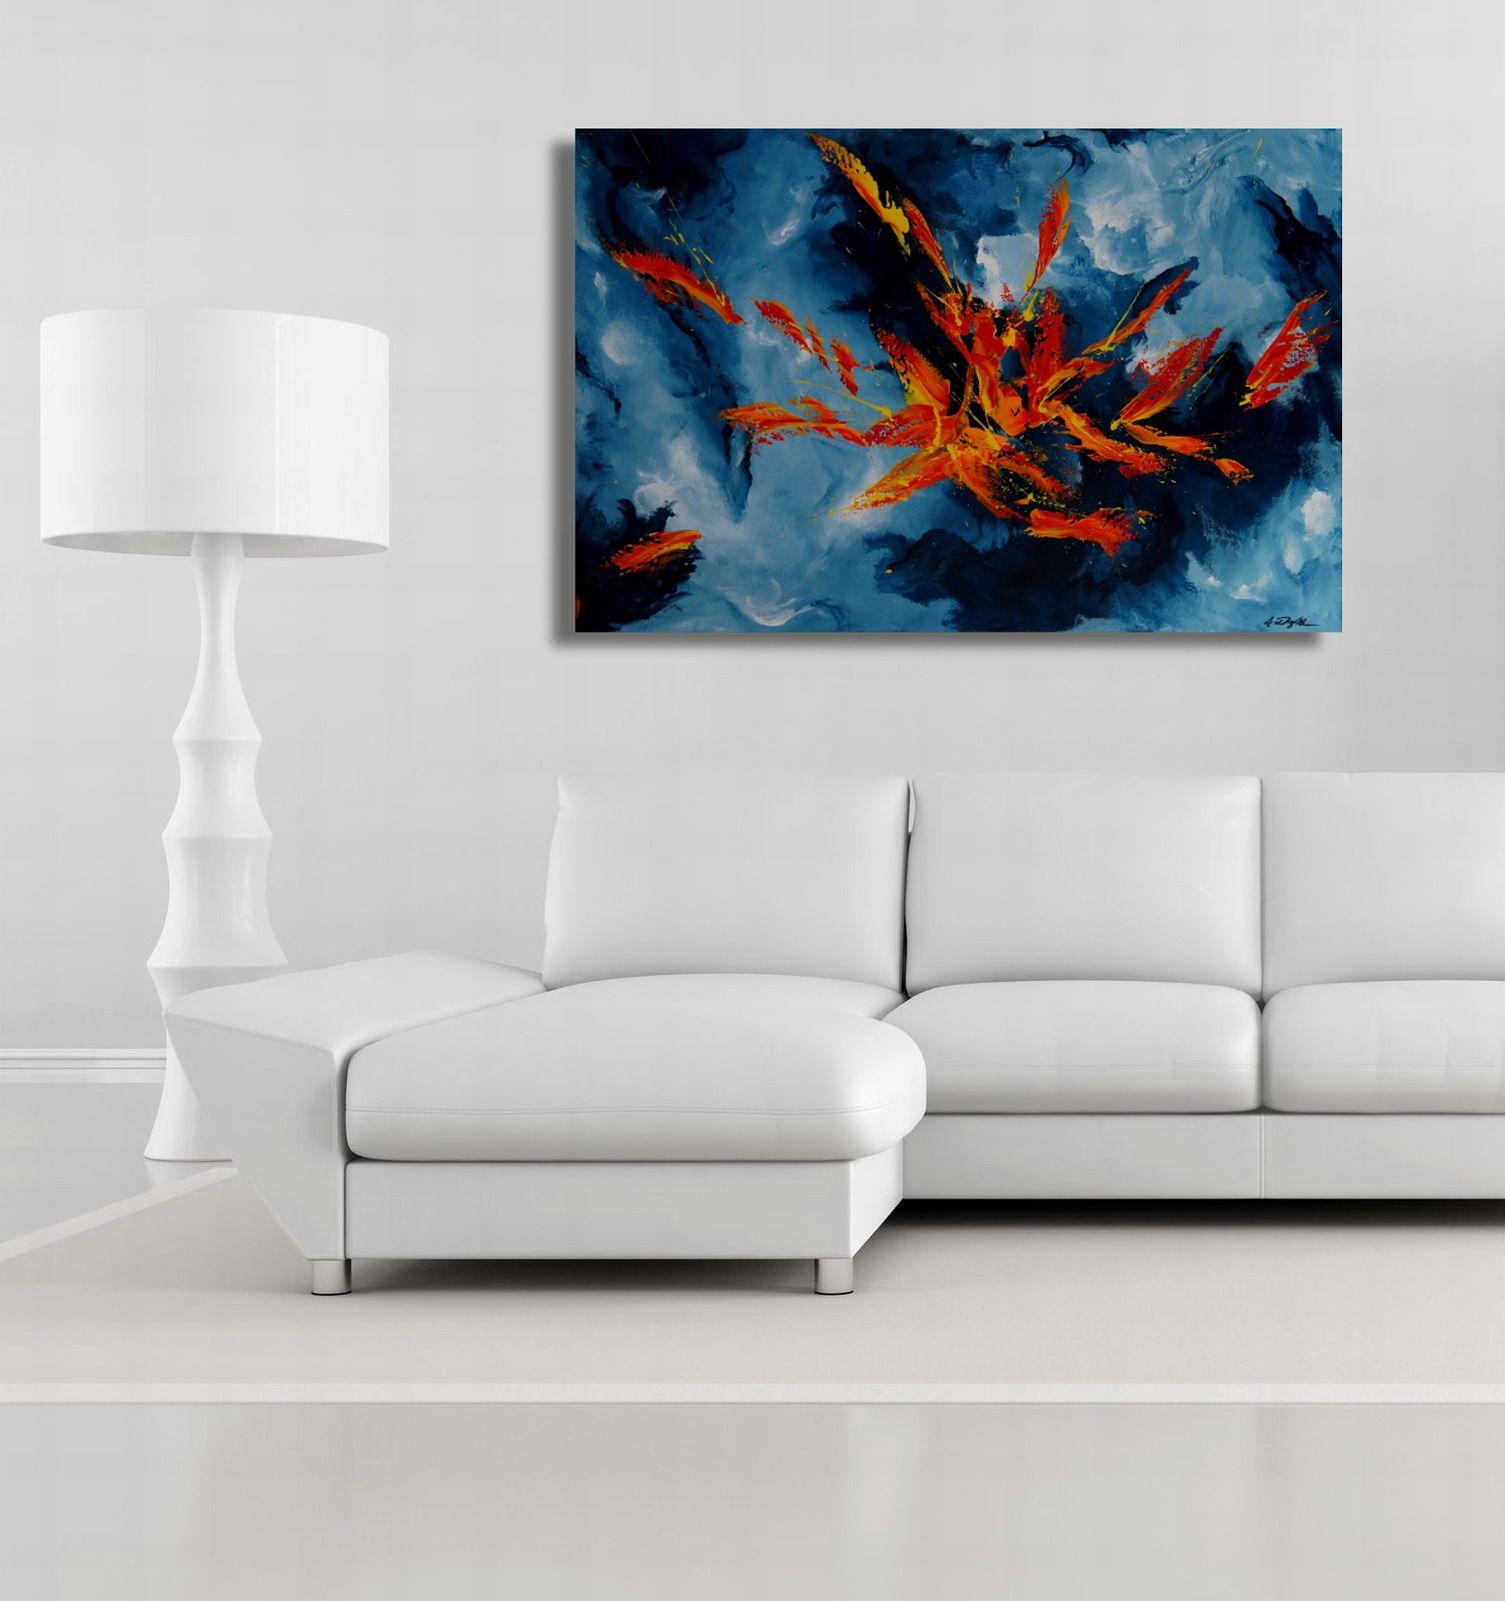 A very lively pallet-knife painting in acrylics, contrasting colors of flames in red and yellow against a dark stormy sky or sea.  Enjoy!    Unique painting using high-quality acrylic colors on professional gallery canvas stretched over solid wooden